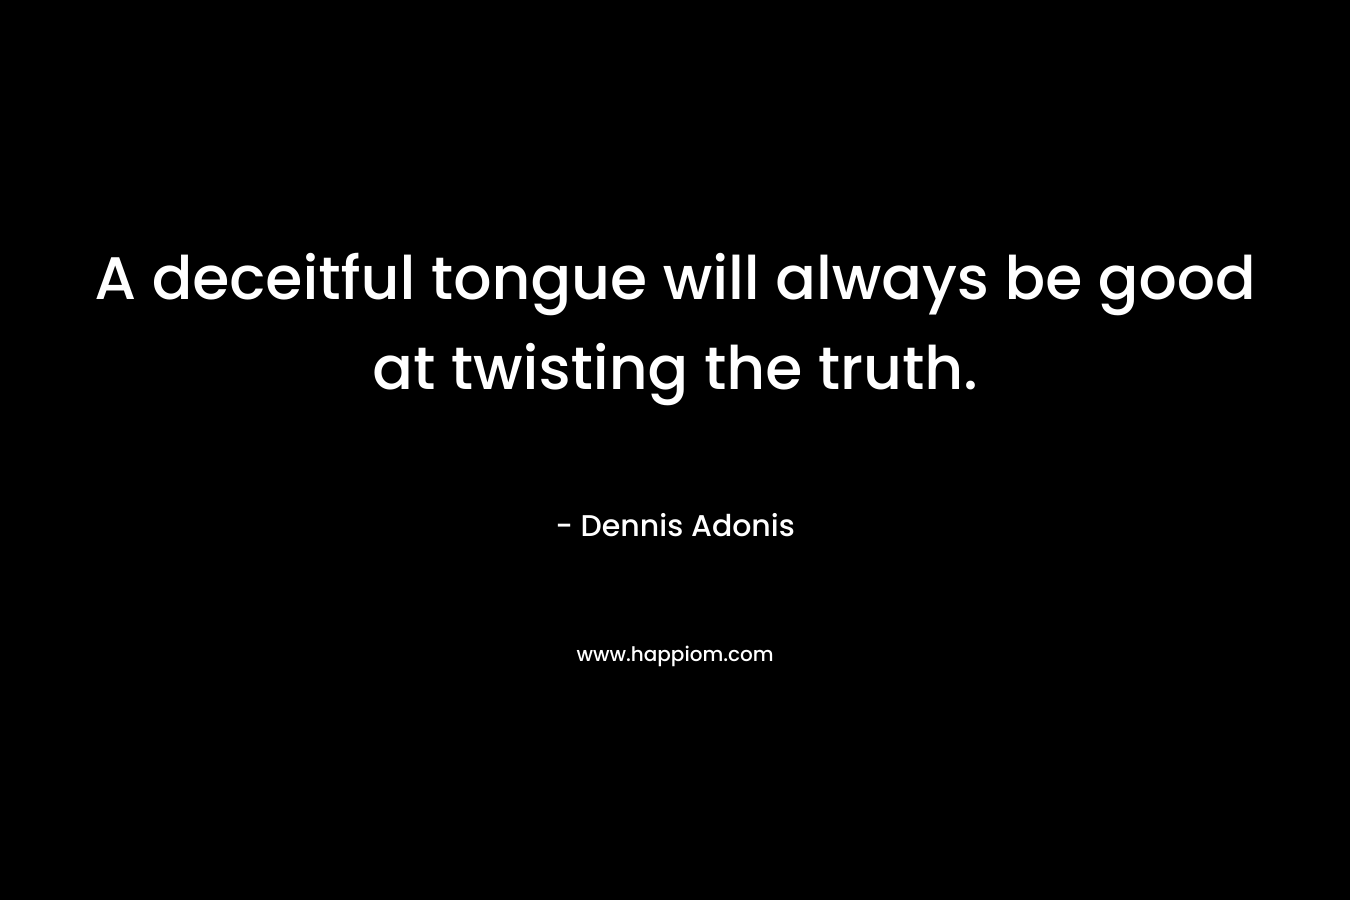 A deceitful tongue will always be good at twisting the truth. – Dennis Adonis